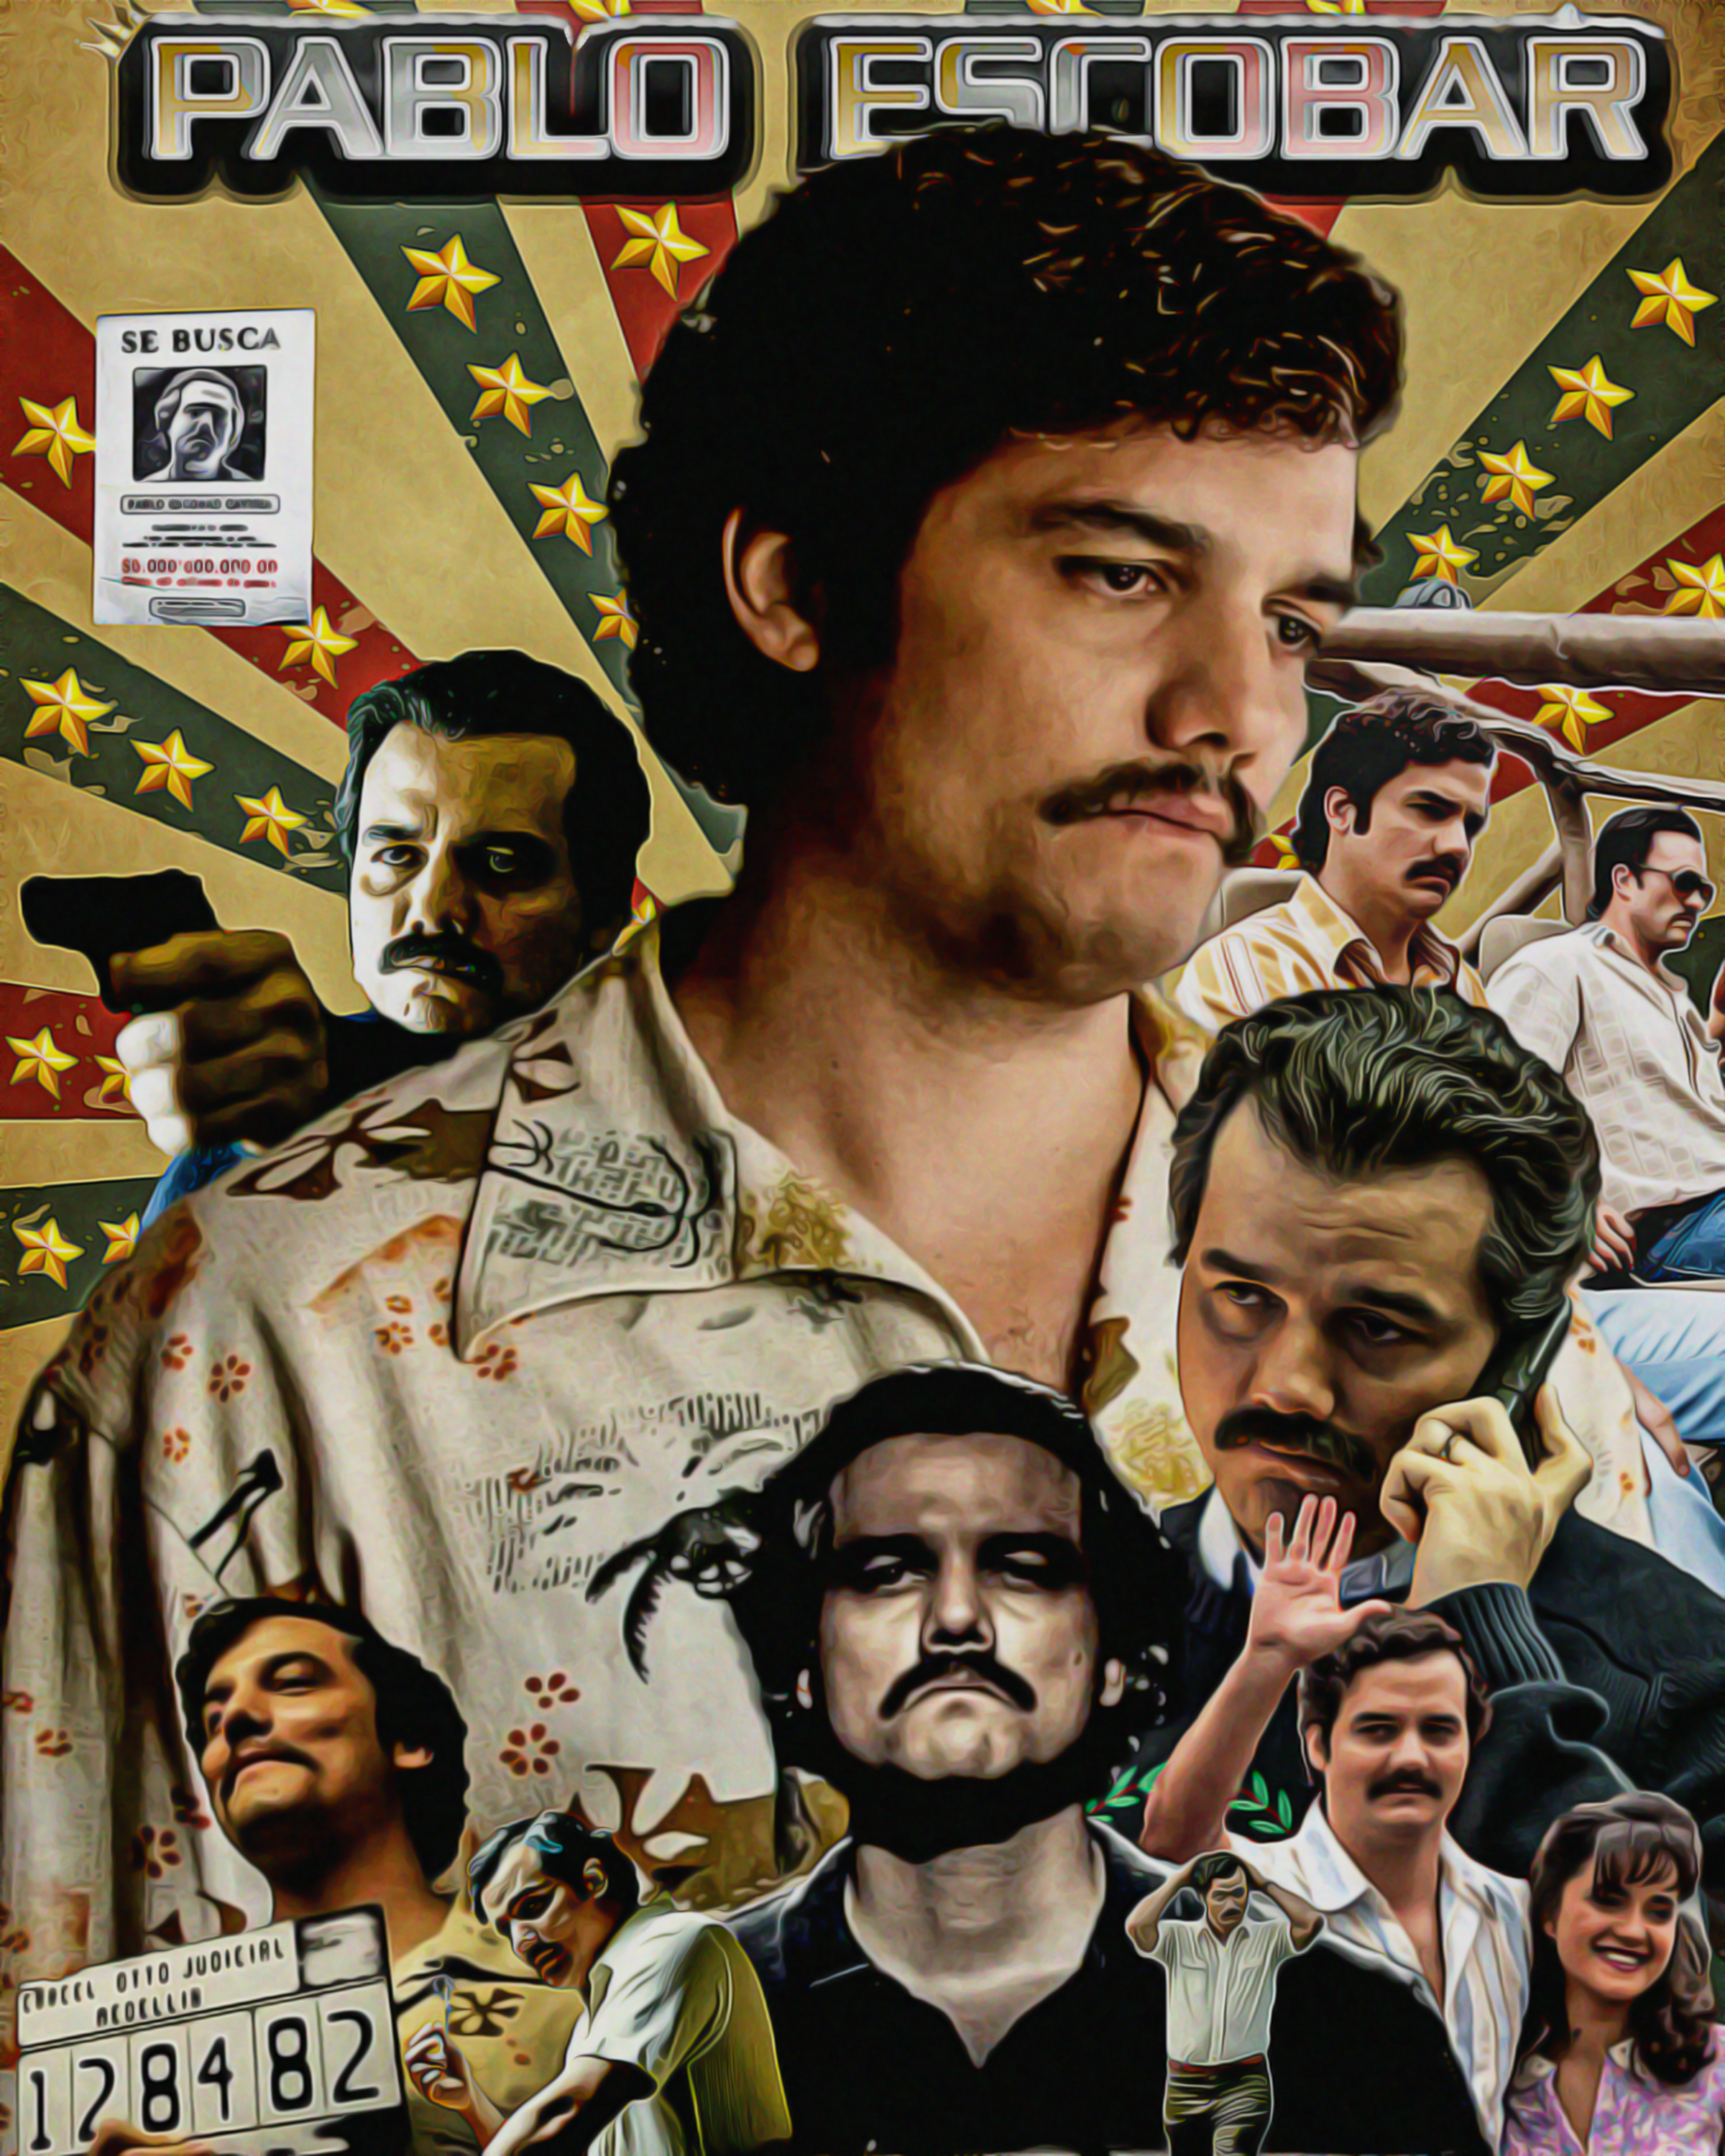 PABLO ESCOBAR From NARCOS Drama Series (Oil Painting Effect)